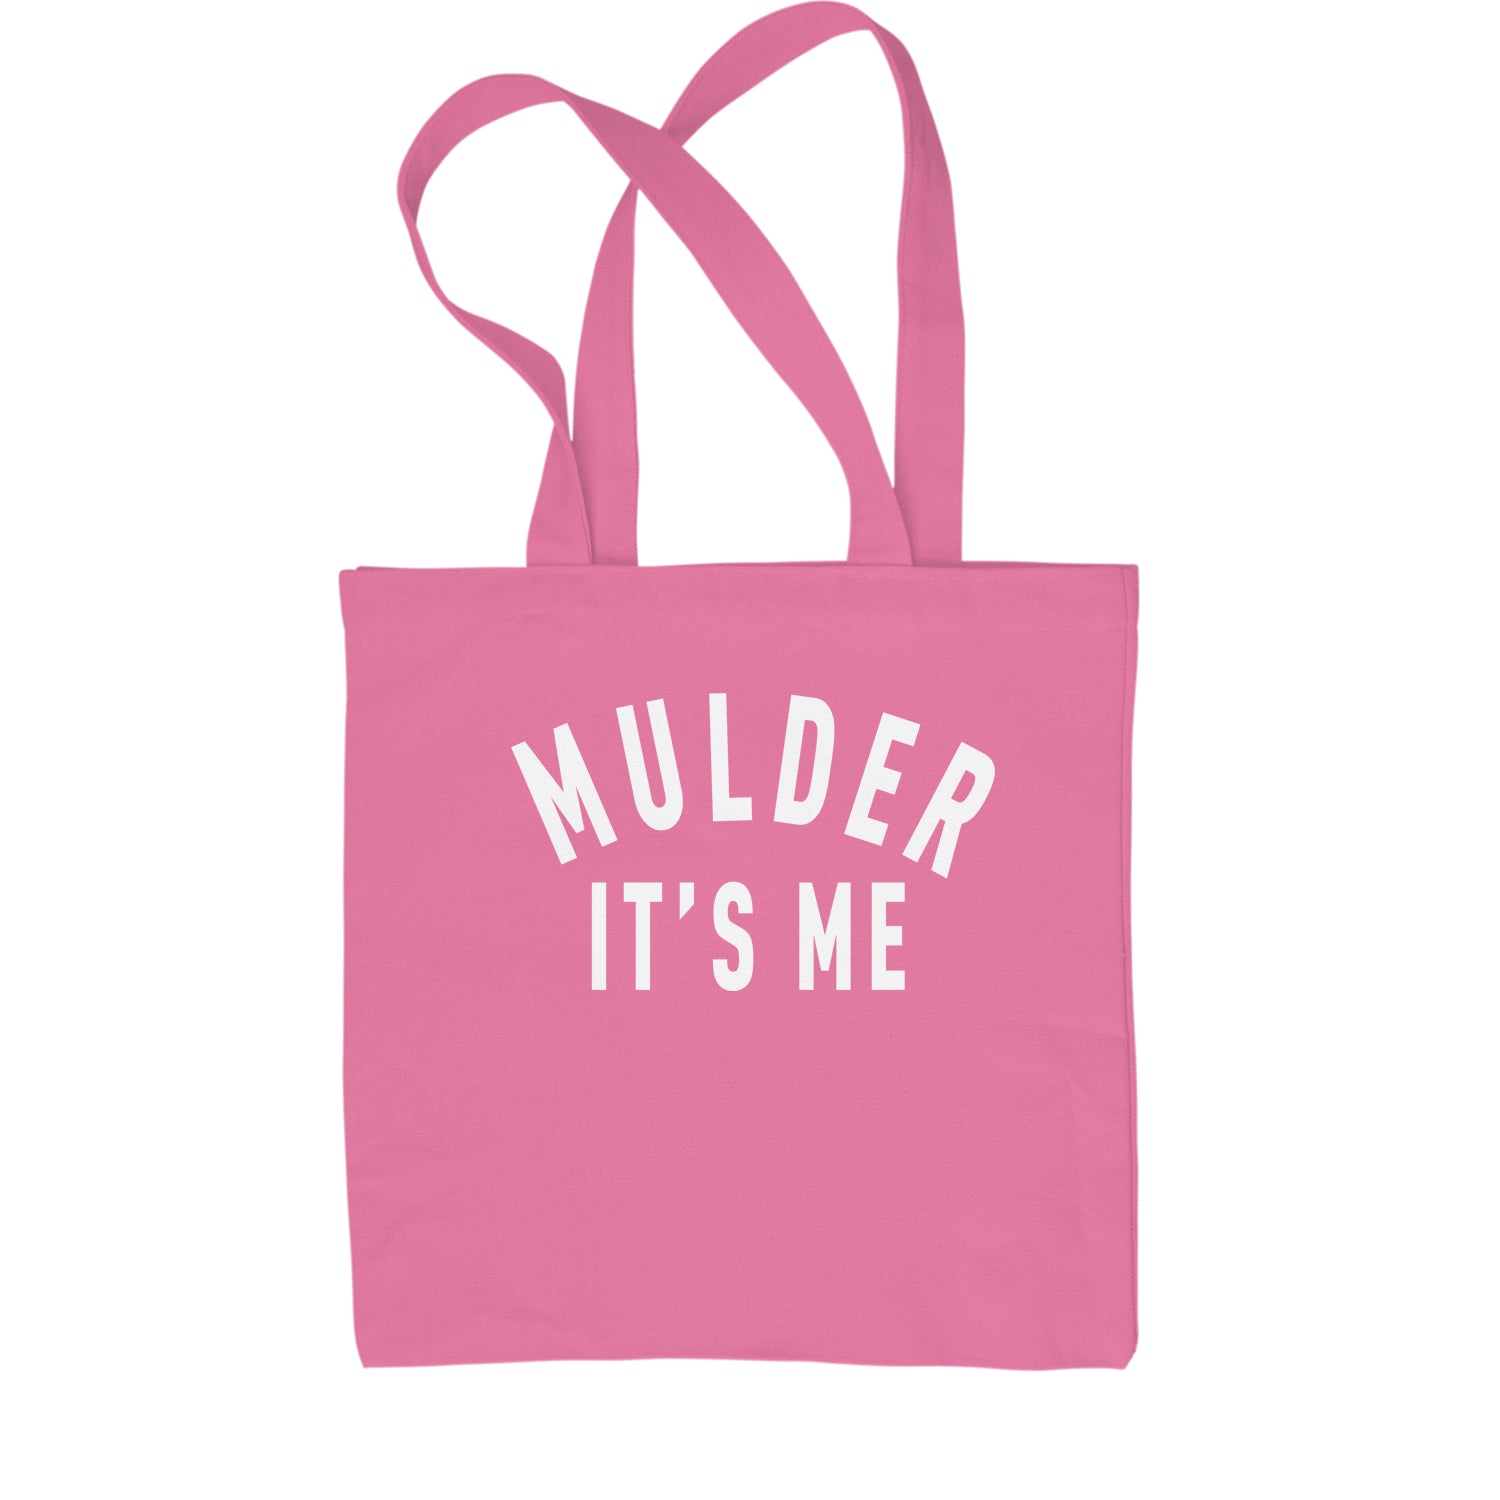 Mulder, It's Me Shopping Tote Bag 51, area, believe, files, is, mulder, out, scully, the, there, truth, x, xfiles by Expression Tees